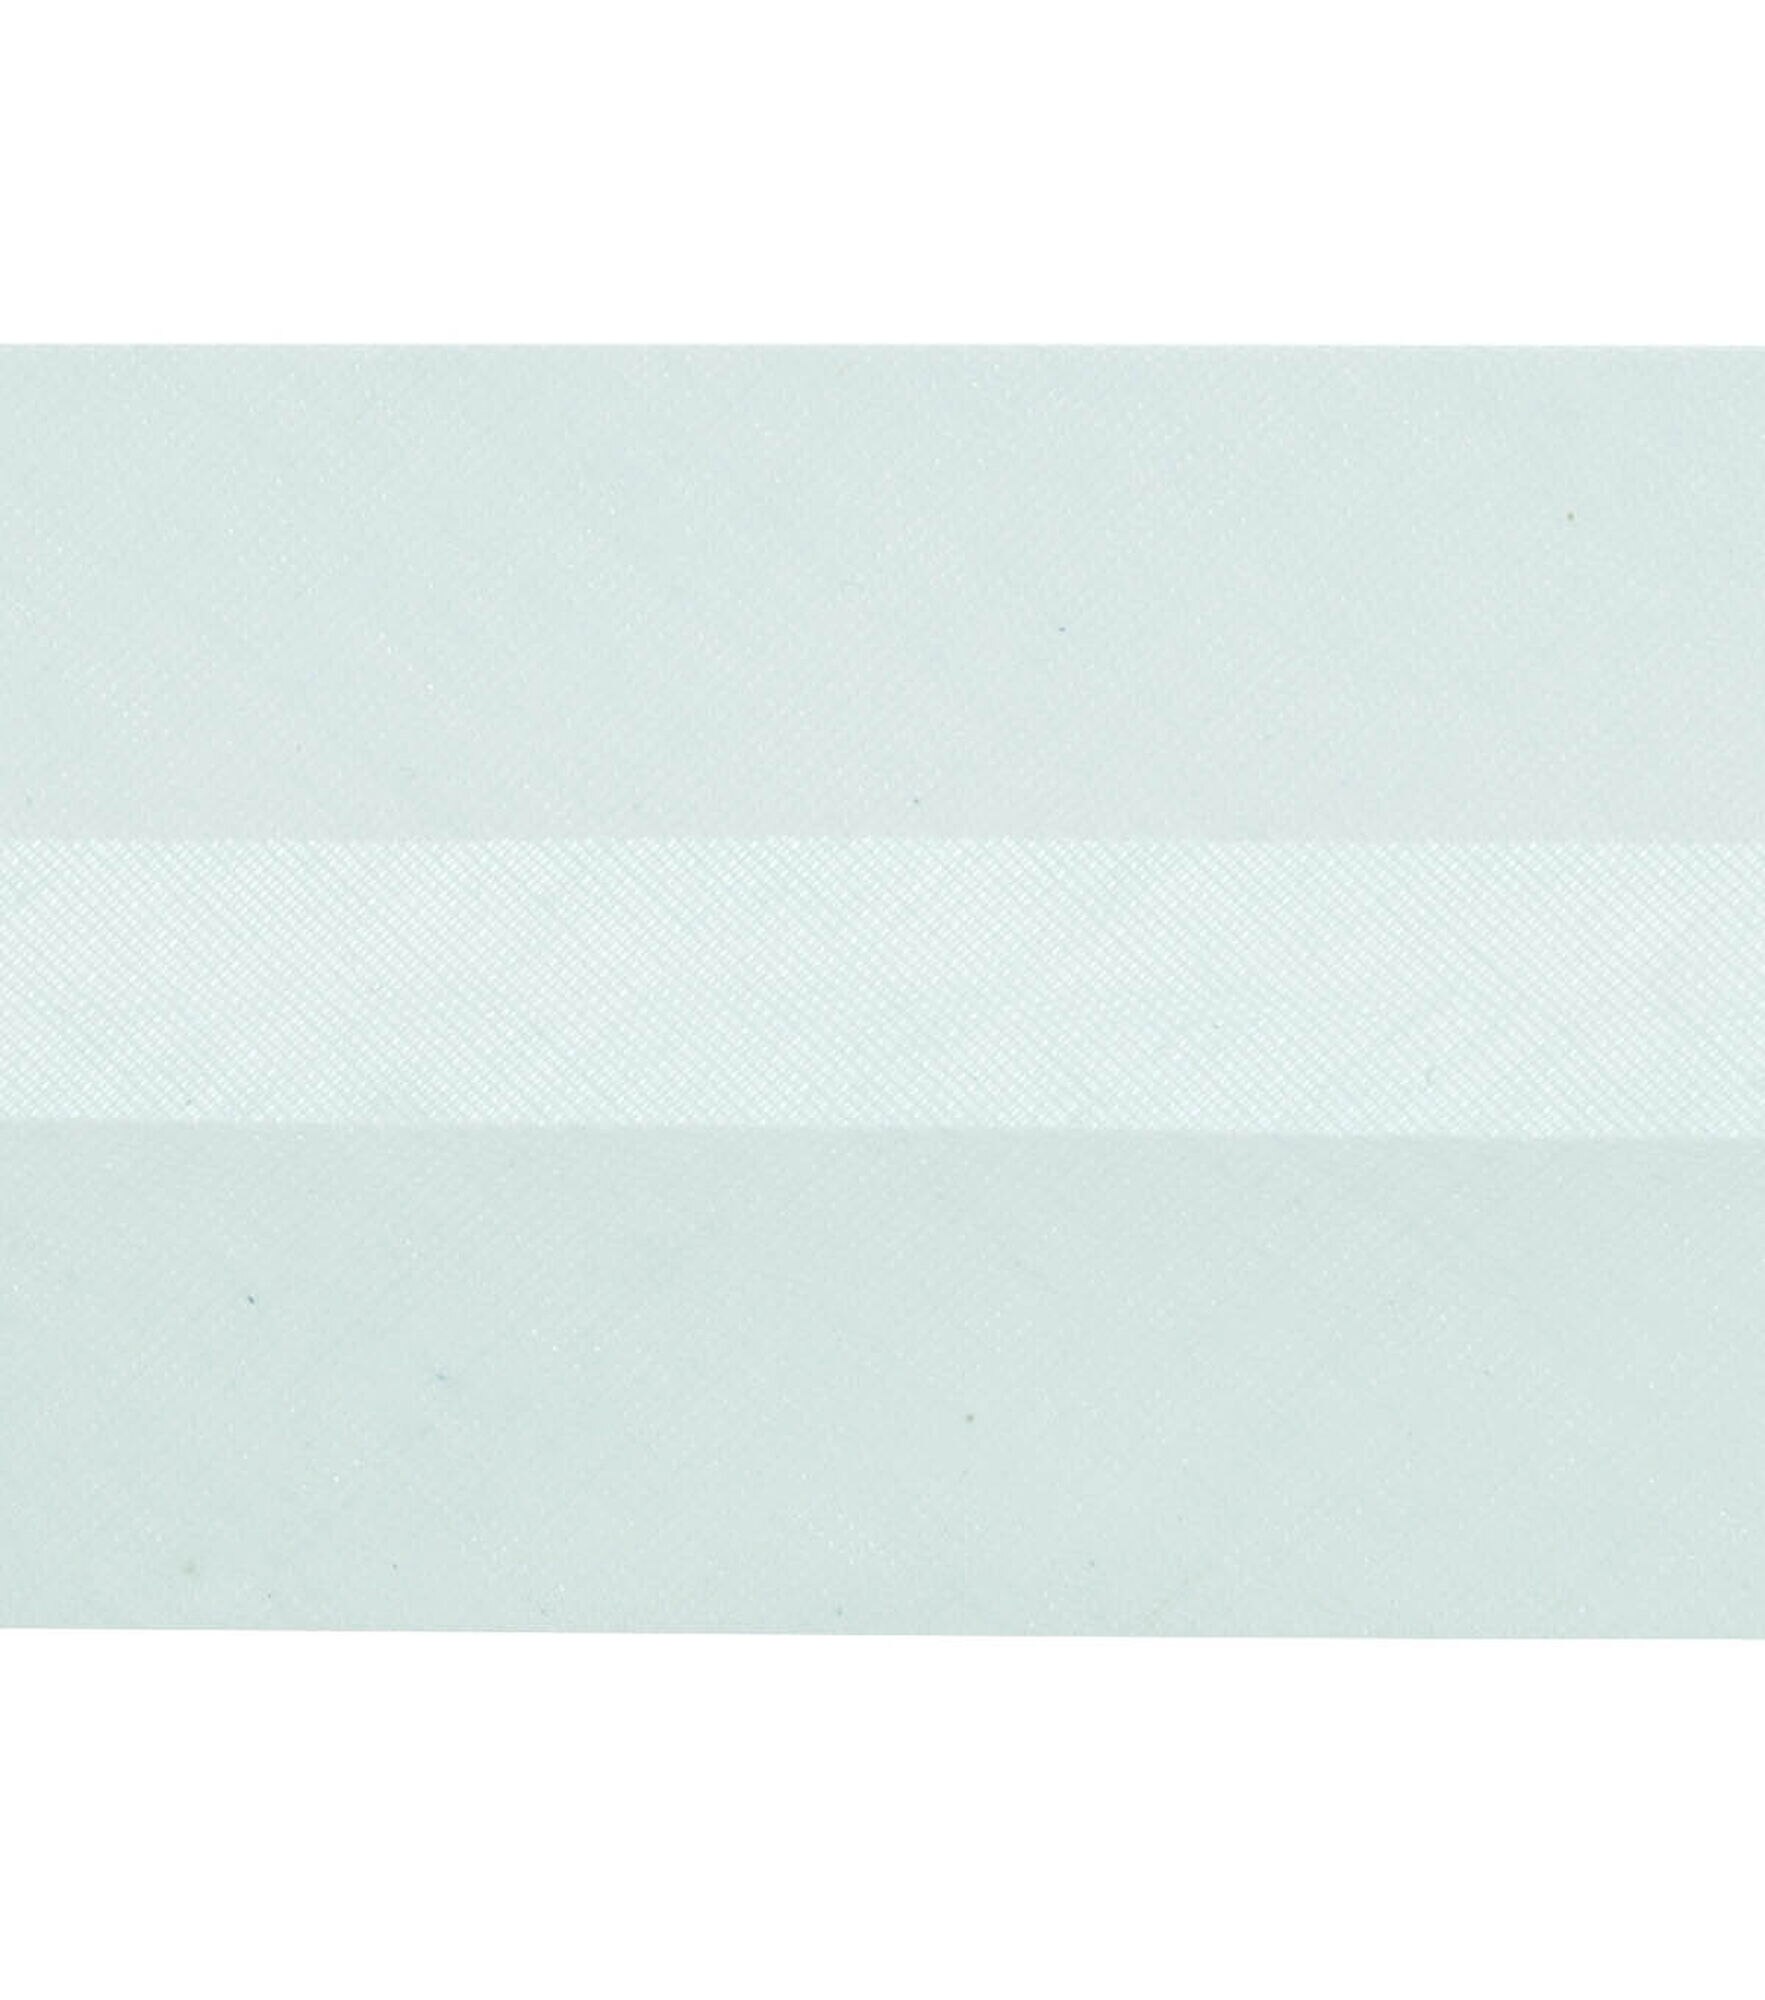 Wrights 7/8" x 3yd Double Fold Quilt Binding, Ice Mint, hi-res